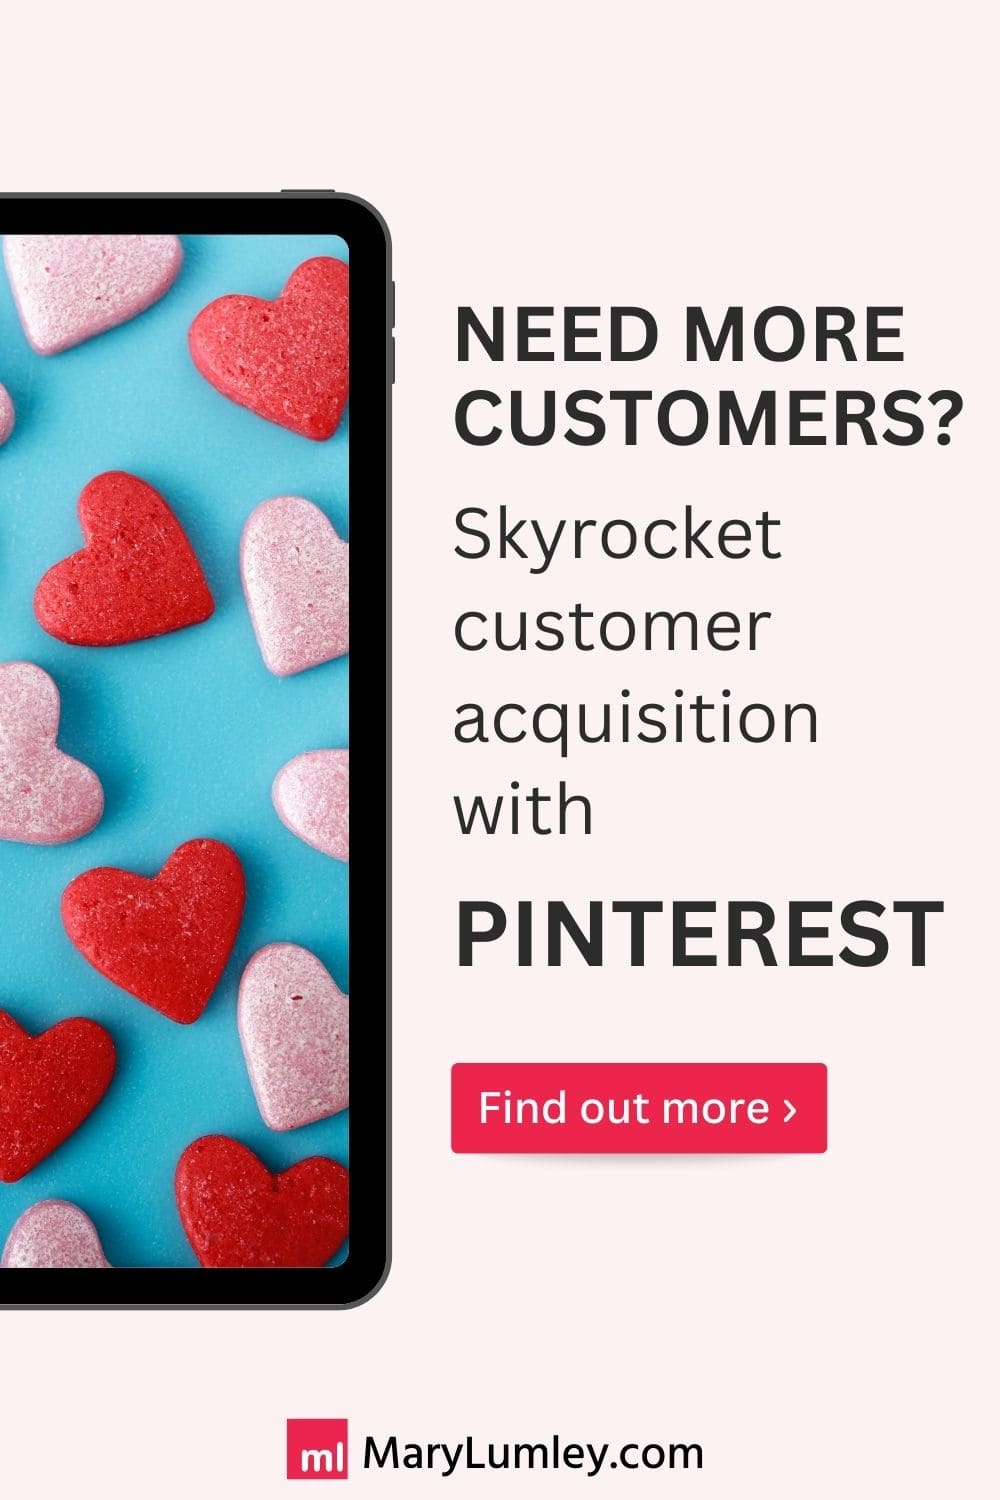 5 Good reasons to make Pinterest your traffic and customer acquisition powerhouse. Your secret weapon to increase site visits, SEO and reach quality customers! #pinterestmarketing #pinterestforbusiness #pinteresttips